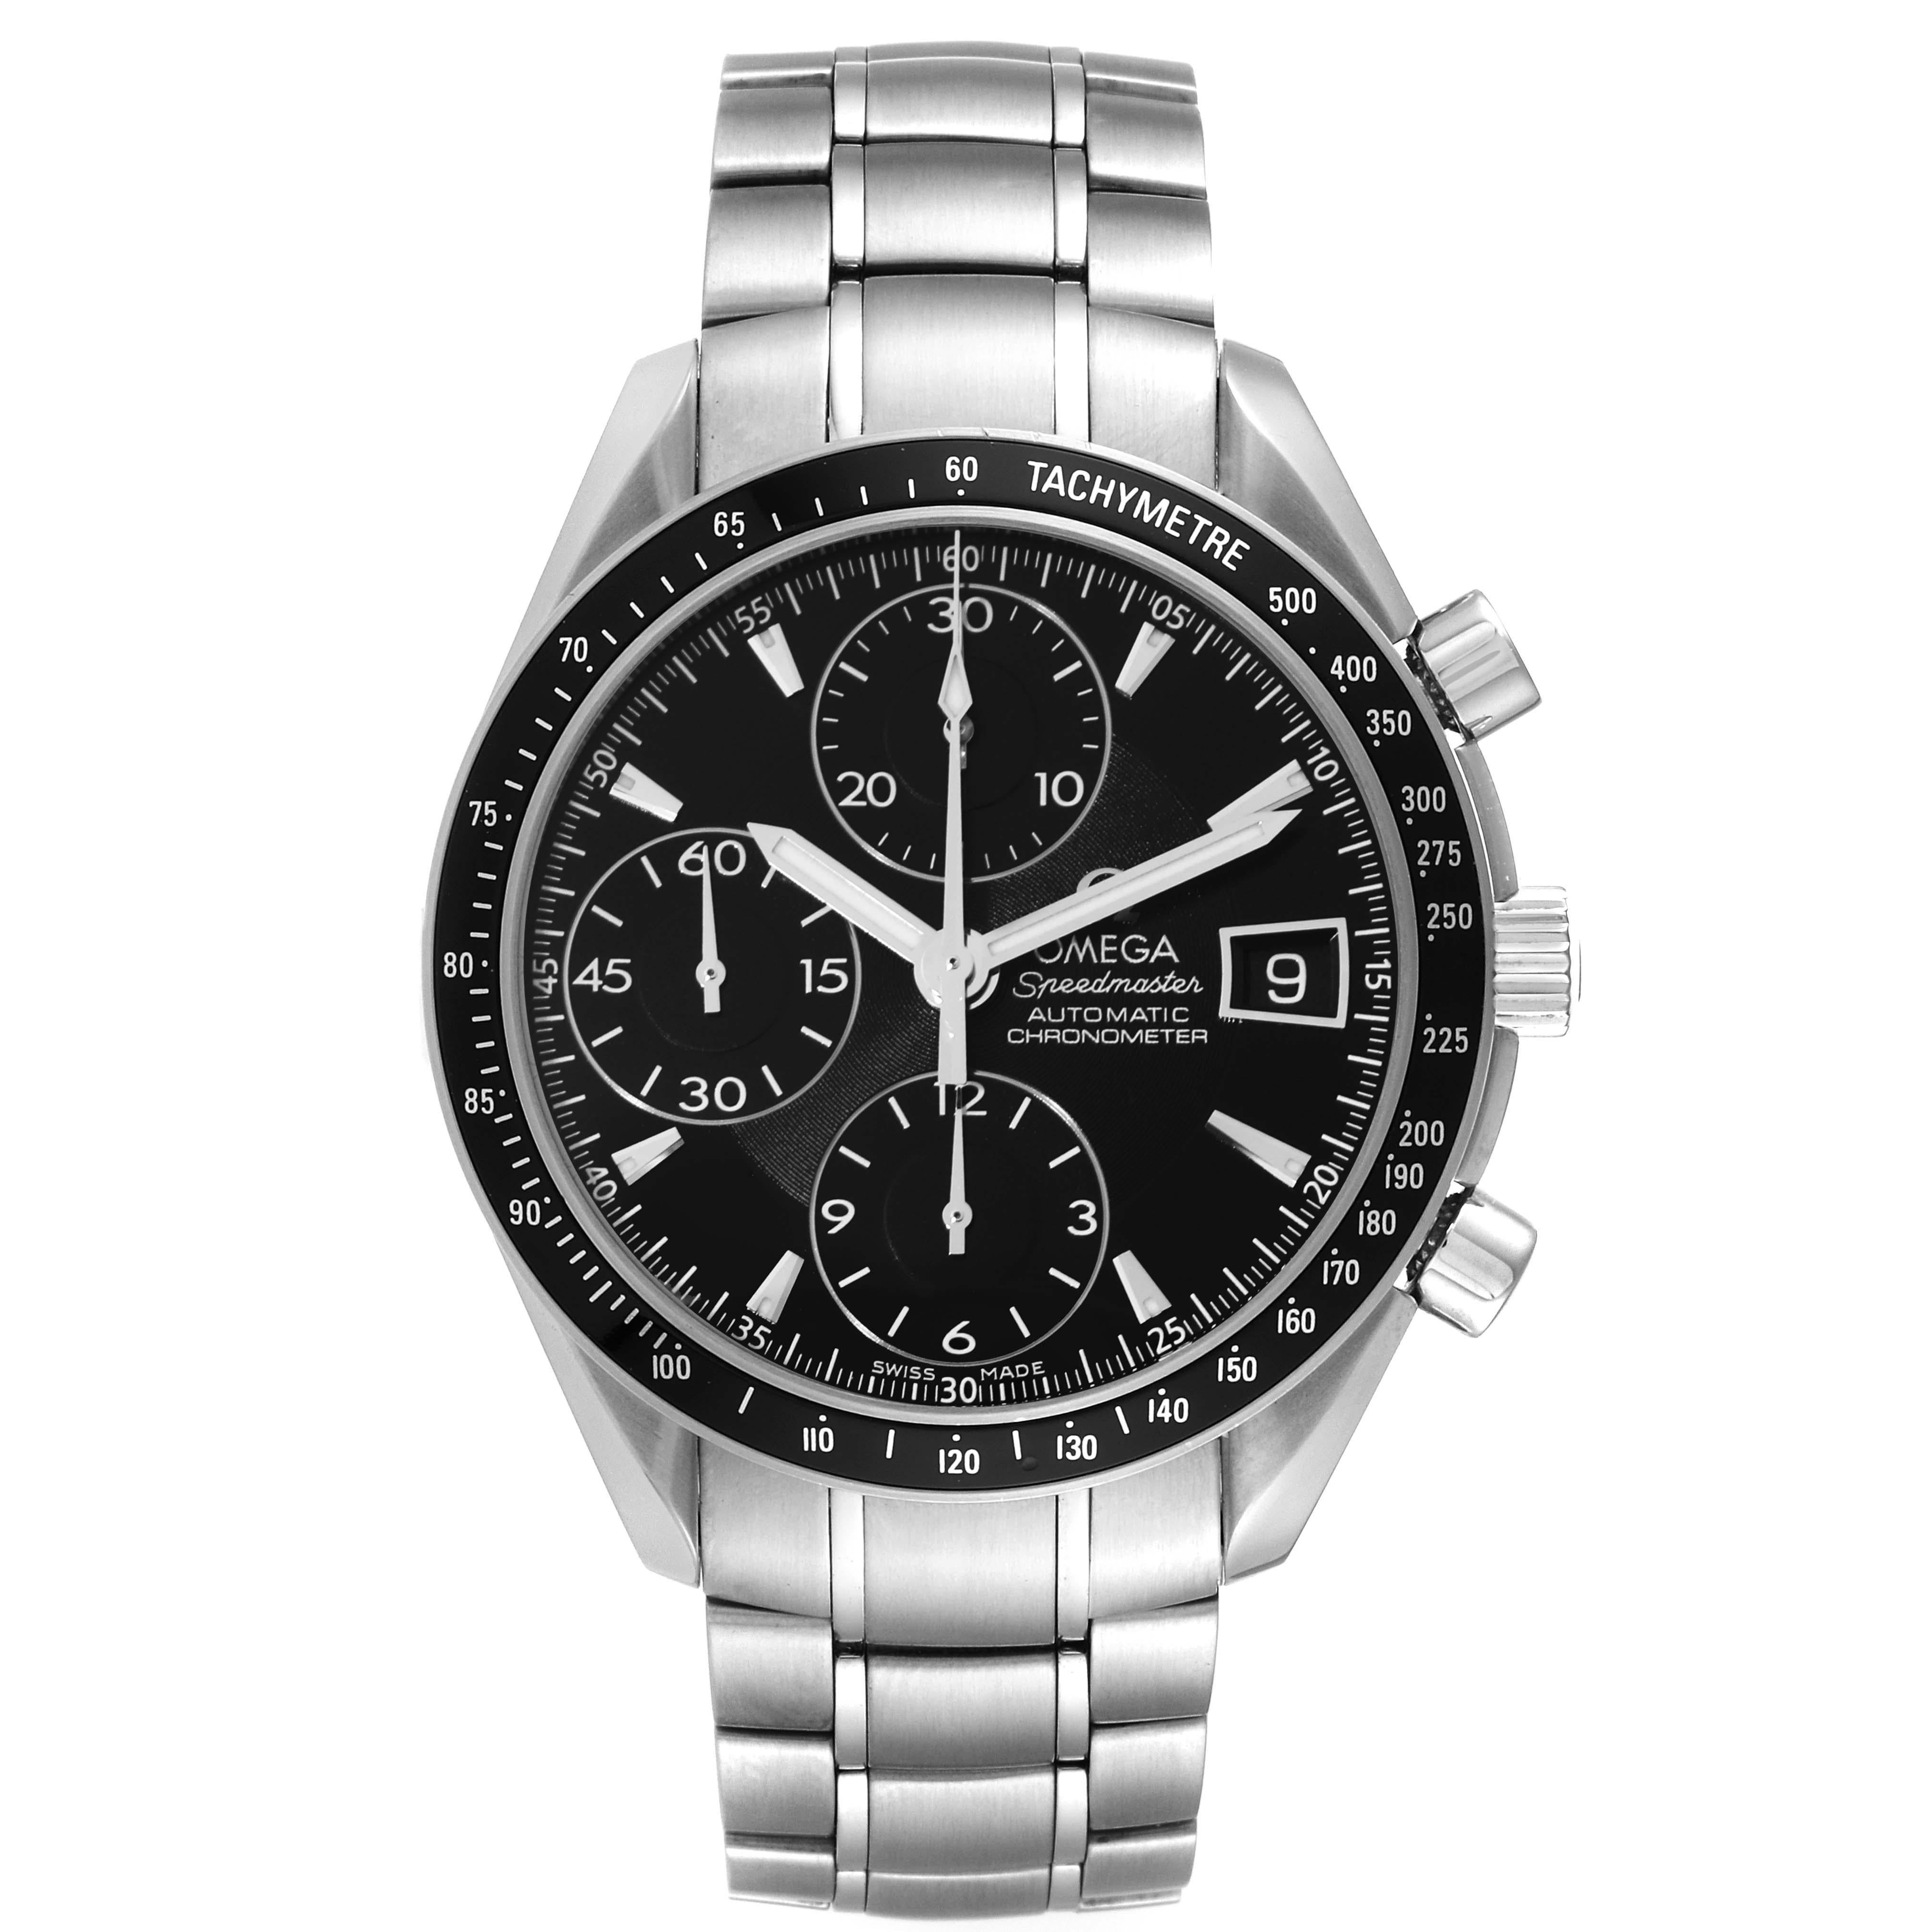 Omega Speedmaster Date Black Dial Steel Mens Watch 3210.50.00. Automatic self-winding chronograph movement. Stainless steel round case 40.0 mm in diameter. Black bezel with tachymeter function. Scratch-resistant sapphire crystal with anti-reflective